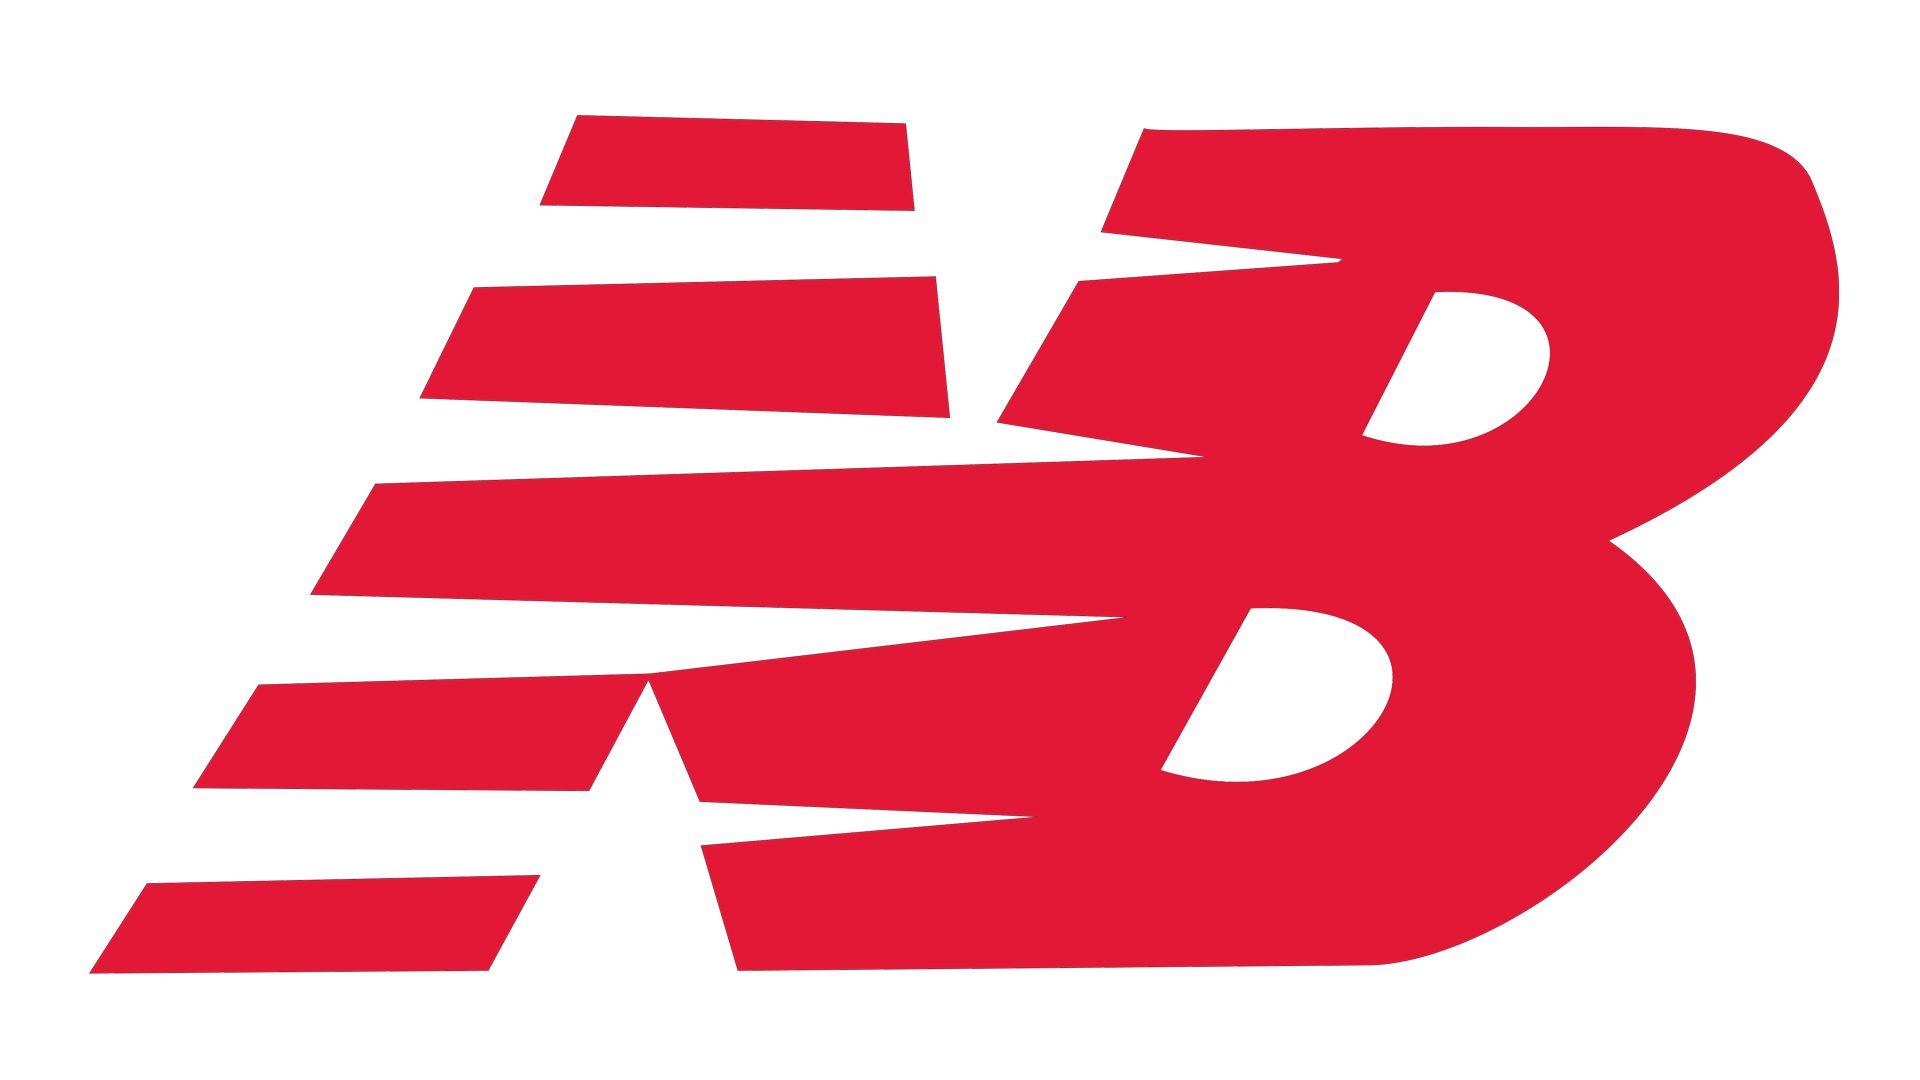 New Balance White Logo - New Balance Logo, New Balance Symbol, Meaning, History and Evolution